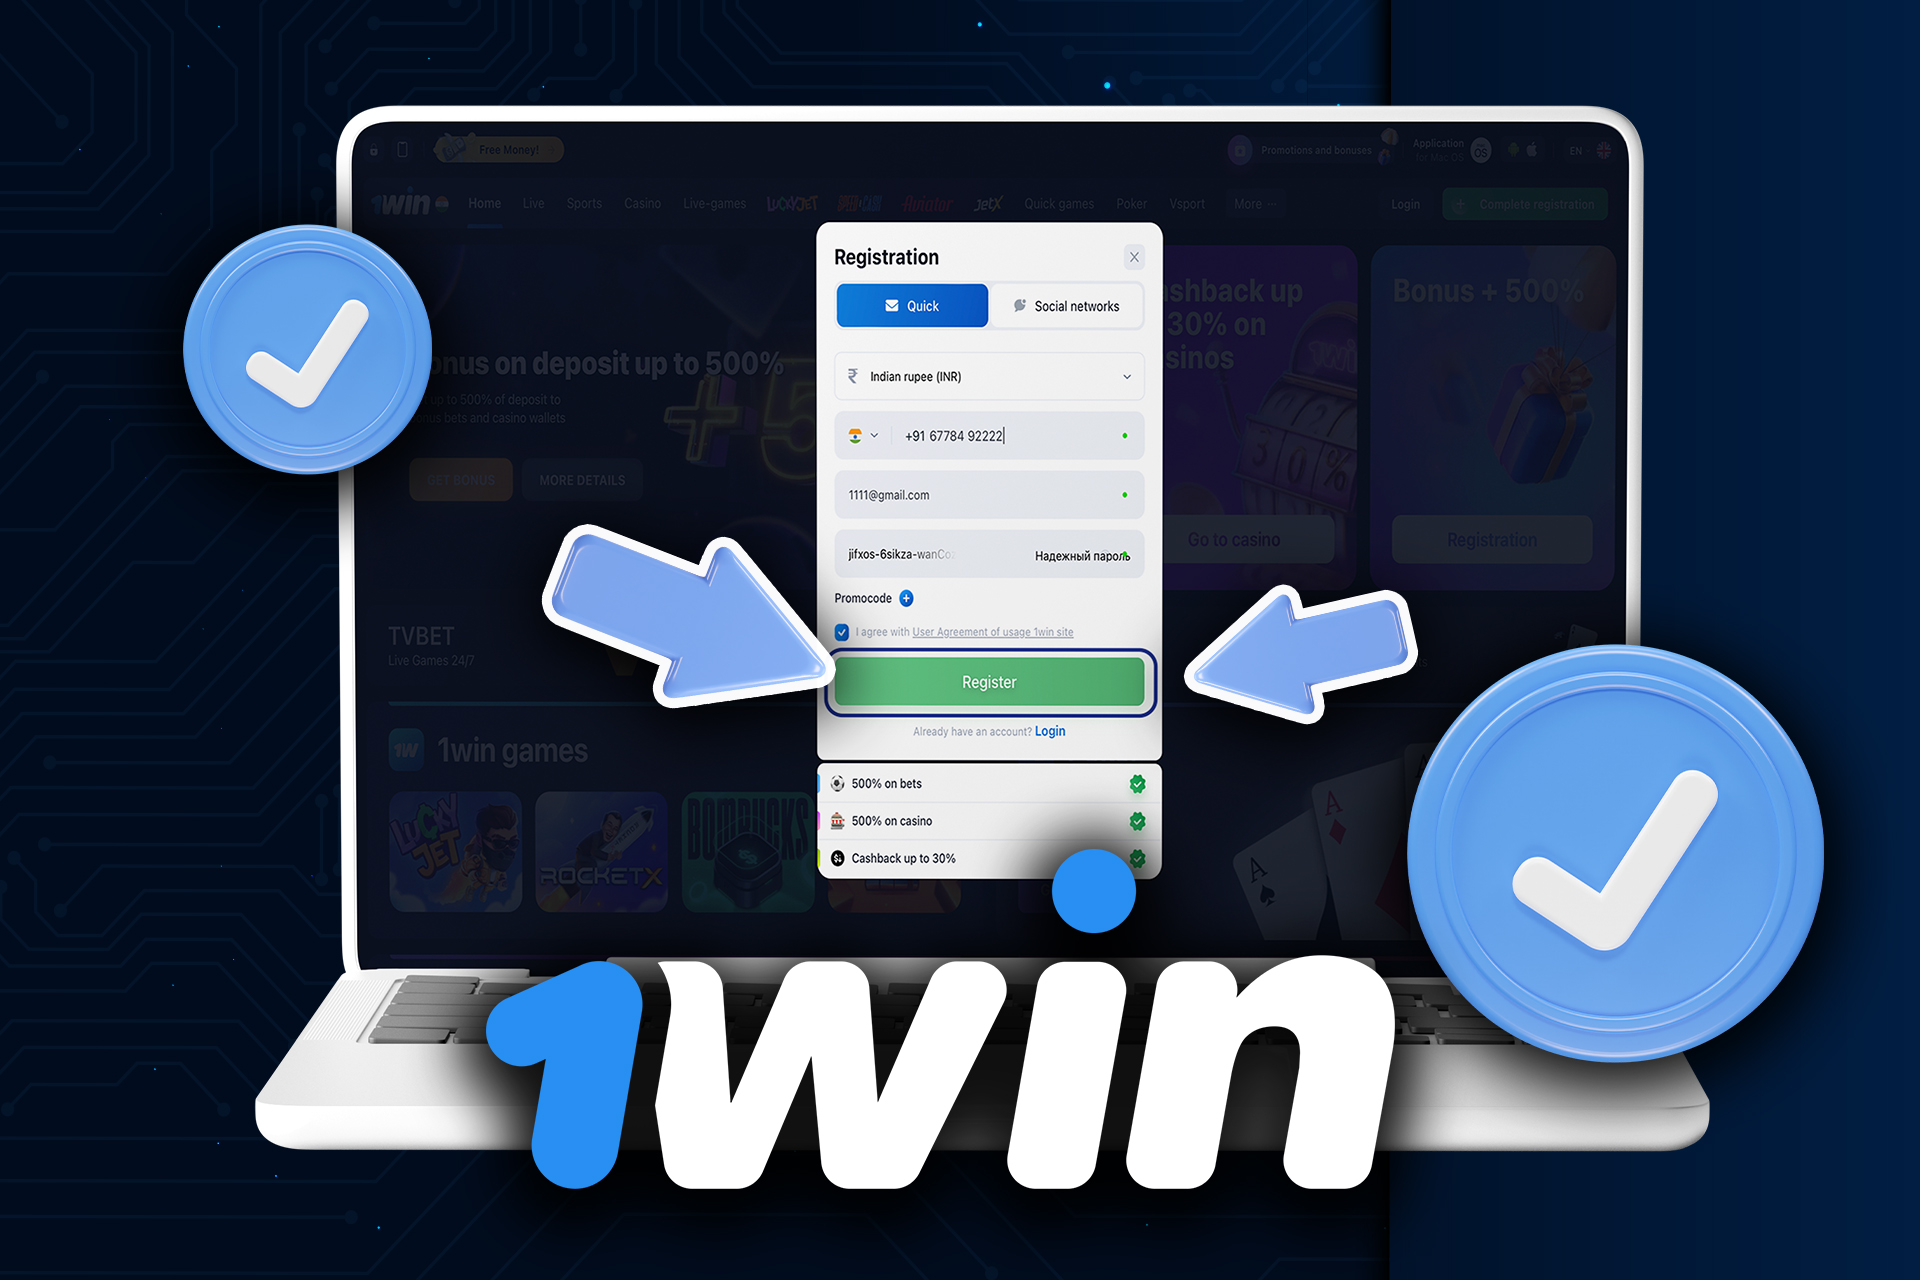 Finsh the registration process and get access to 1win betting platform.